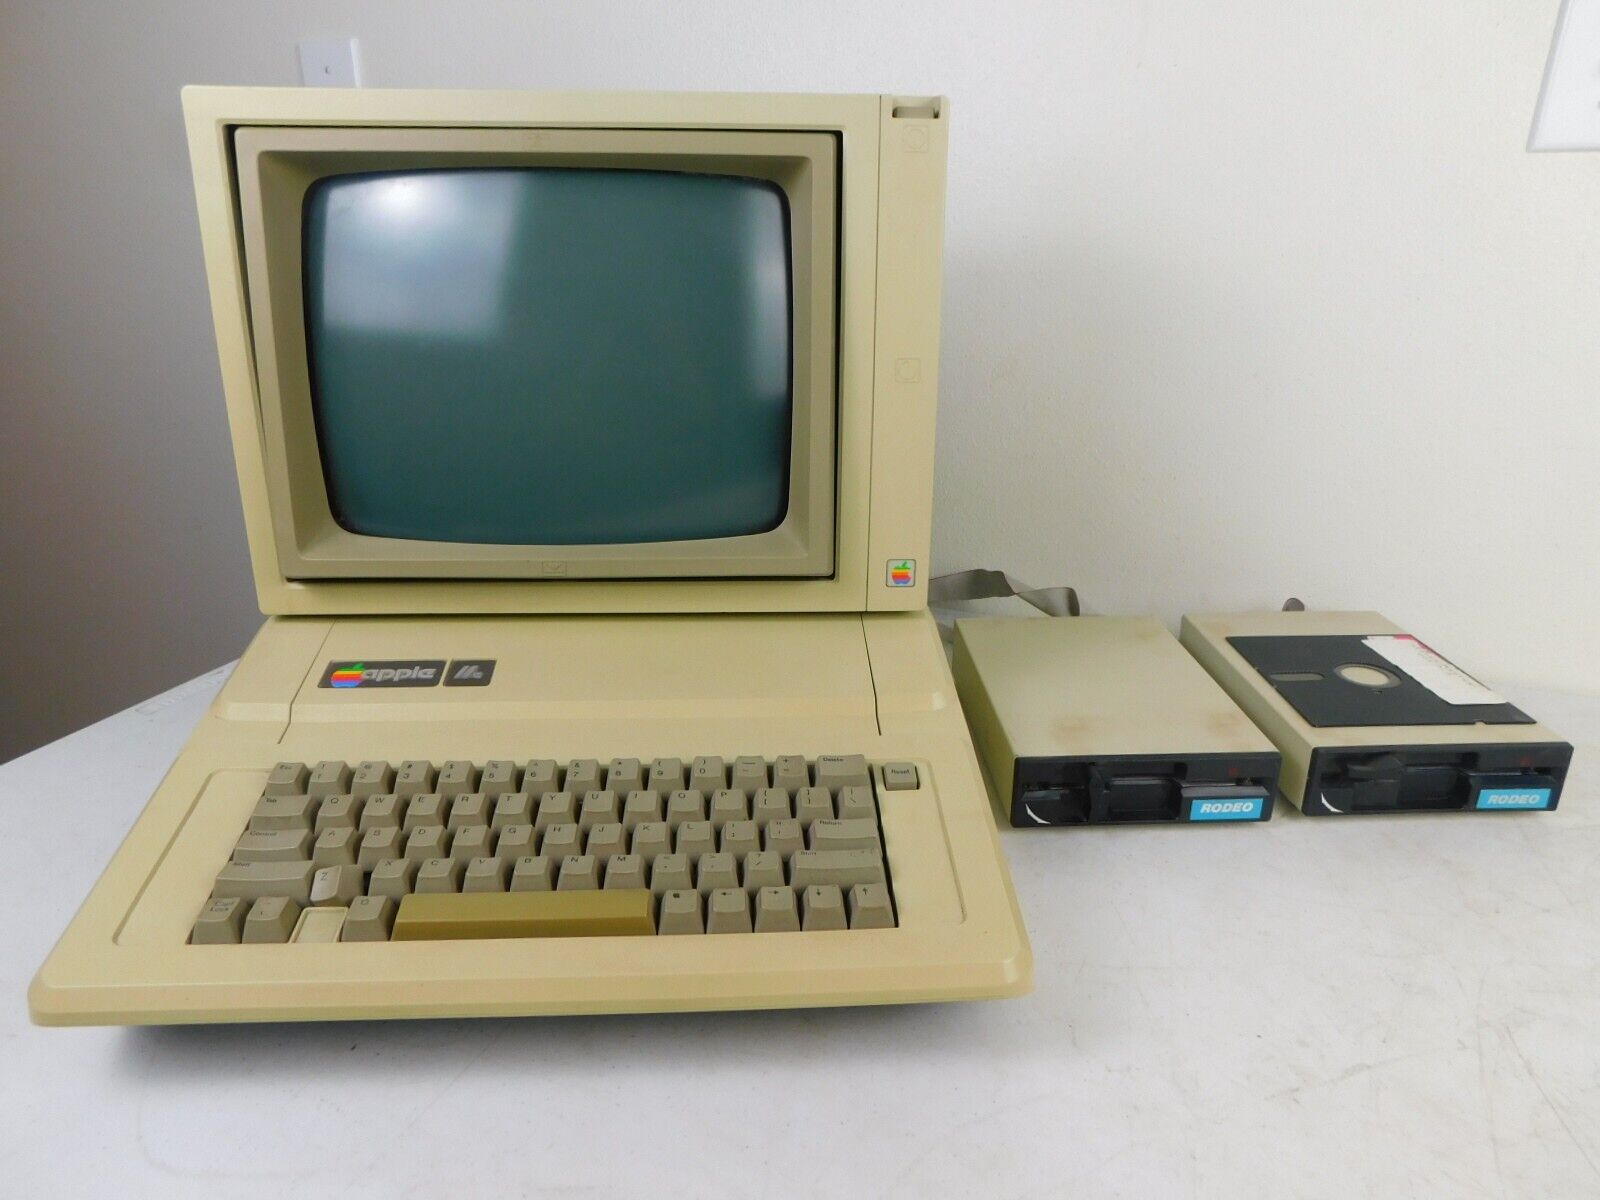 1983 1985 Apple IIe Personal Office Computer A2S2064 w Monitor & 2 Disk Players